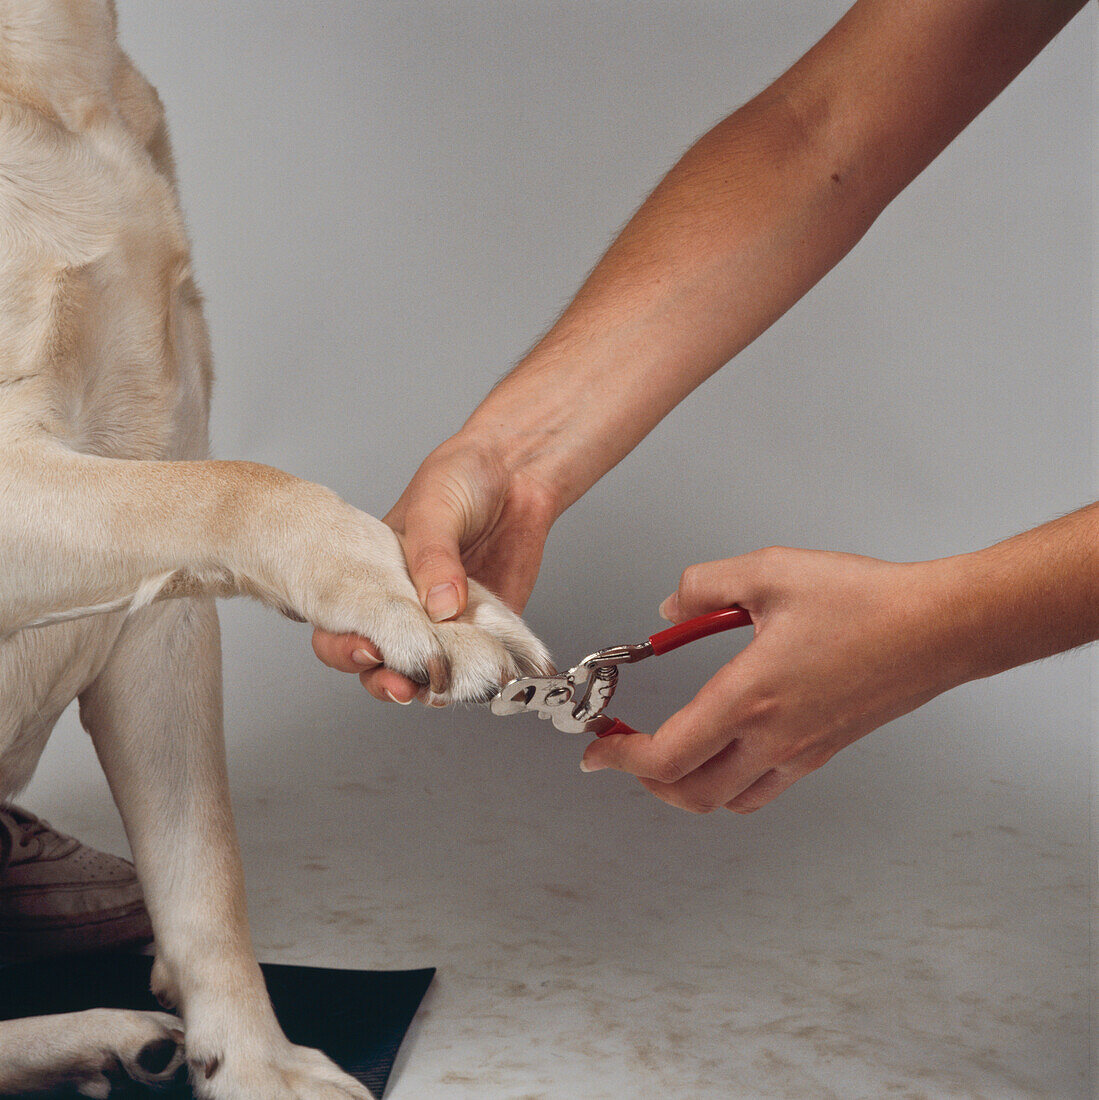 Labrador's nails being clipped with clippers